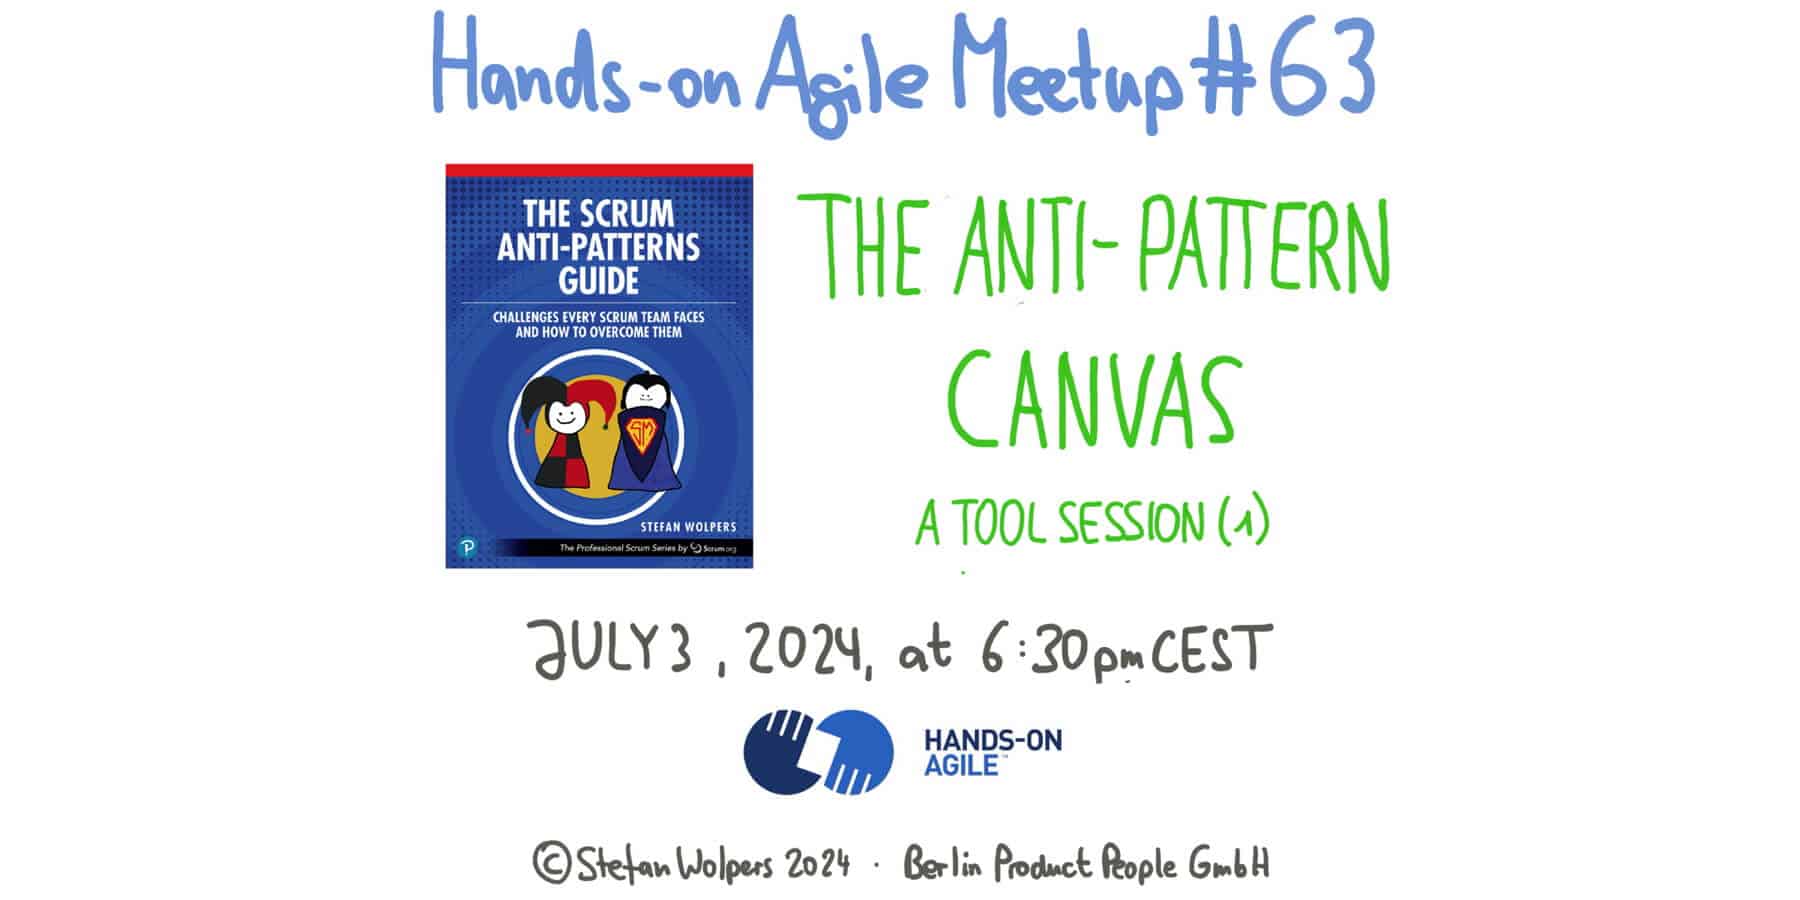 Hands-on Agile #63: The Anti-Pattern Canvas — A Tool Session with Stefan Wolpers — Berlin-Product-People.com